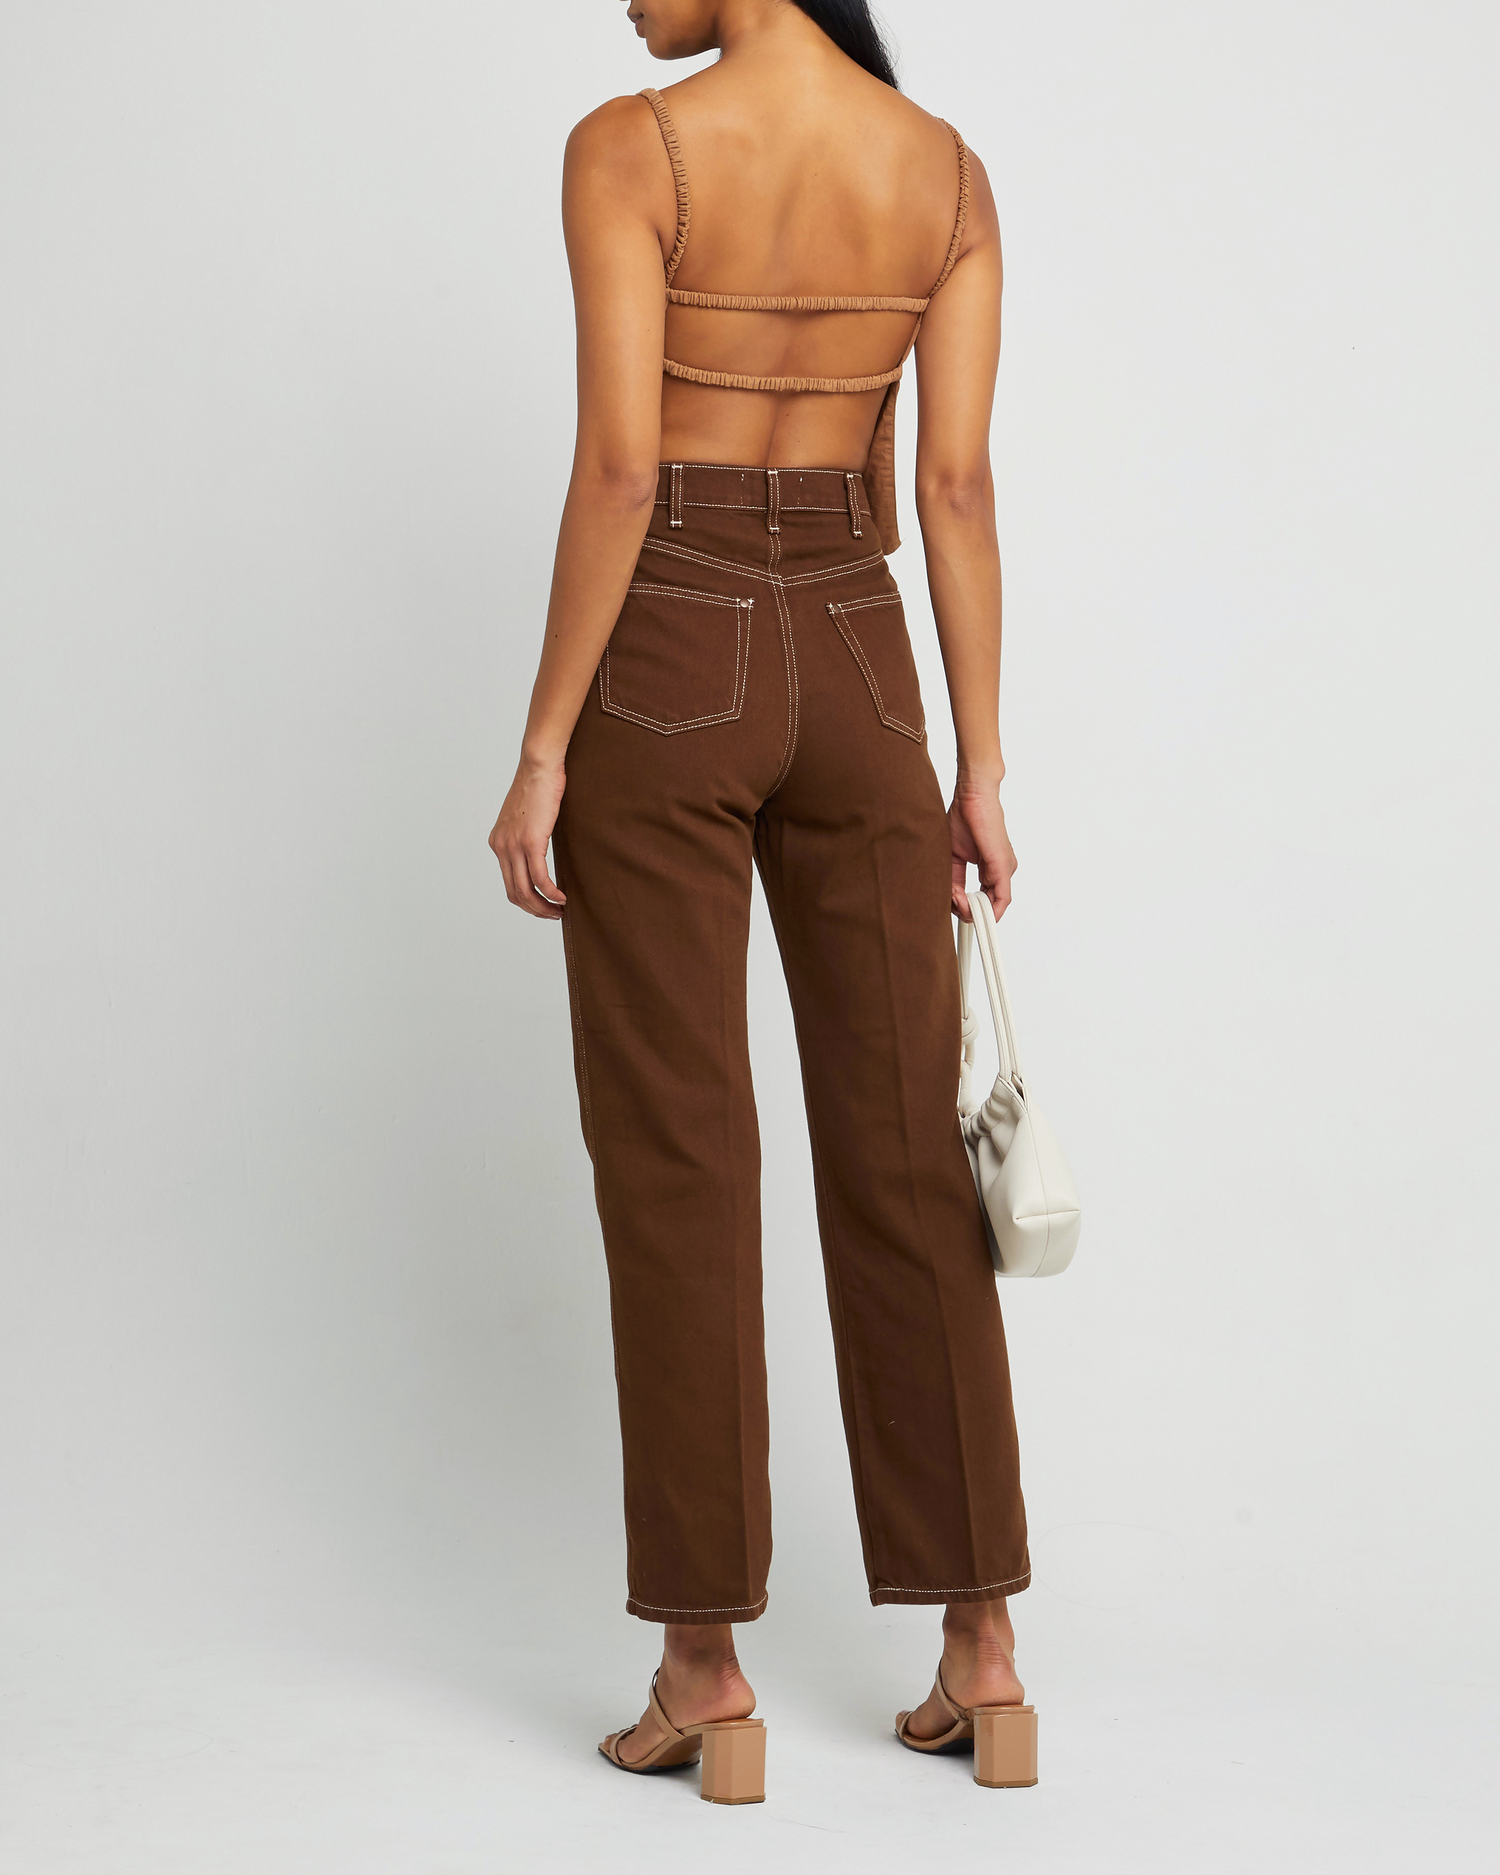 Fifth image of Carina Tank, a brown sleeveless top, open back, two elastic straps across back, thin elastic straps